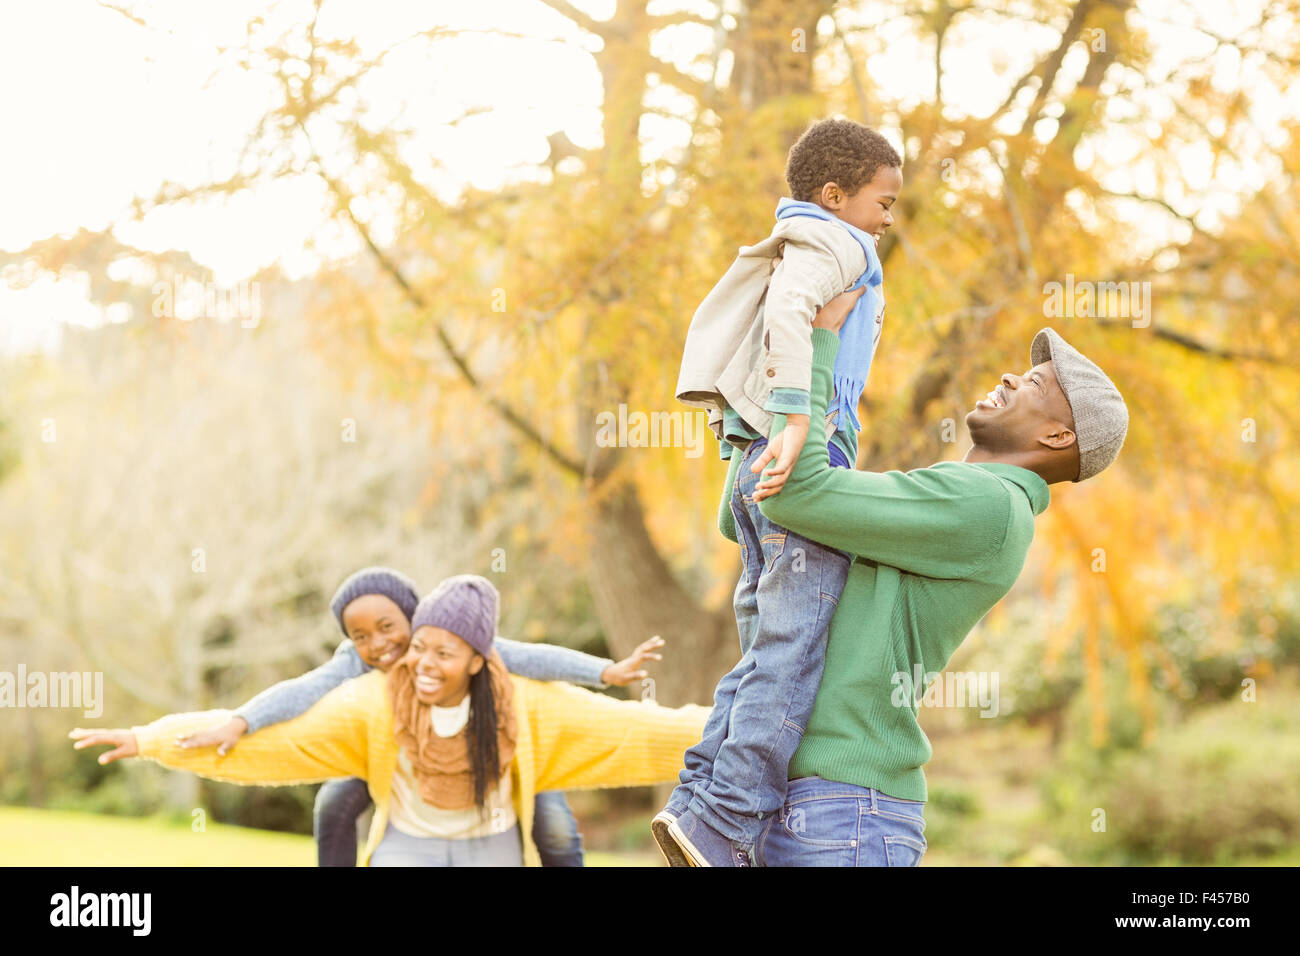 View of a happy young family Stock Photo